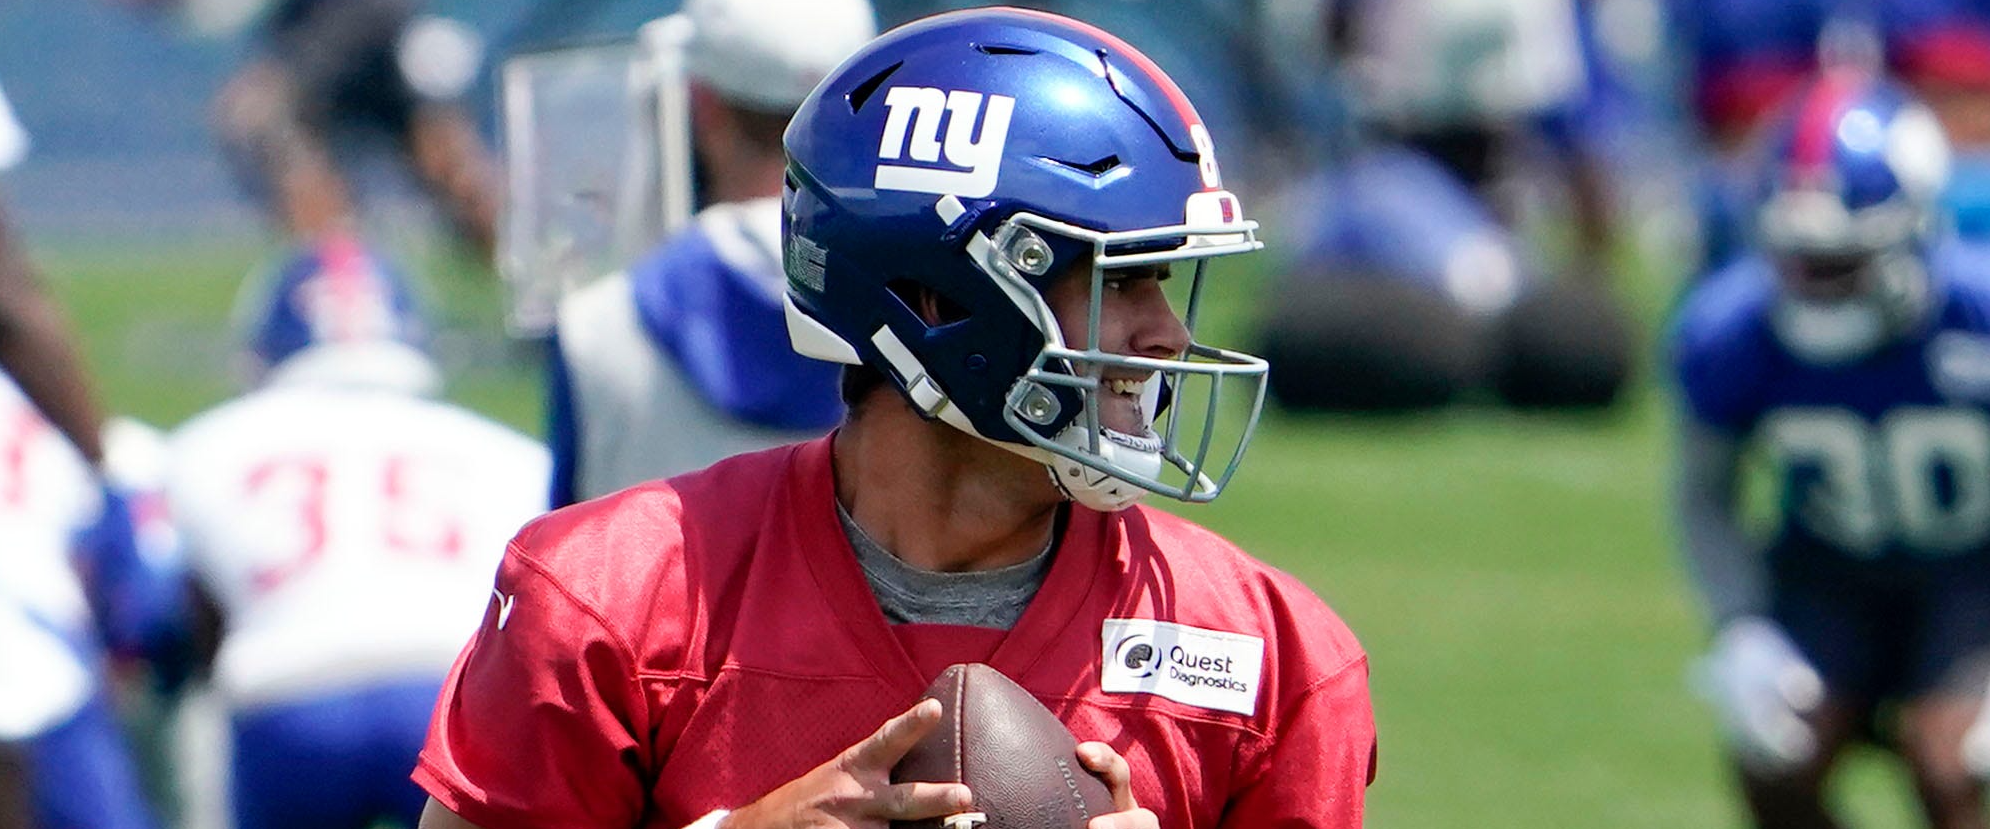 New York Giants 2021 Training Camp Preview